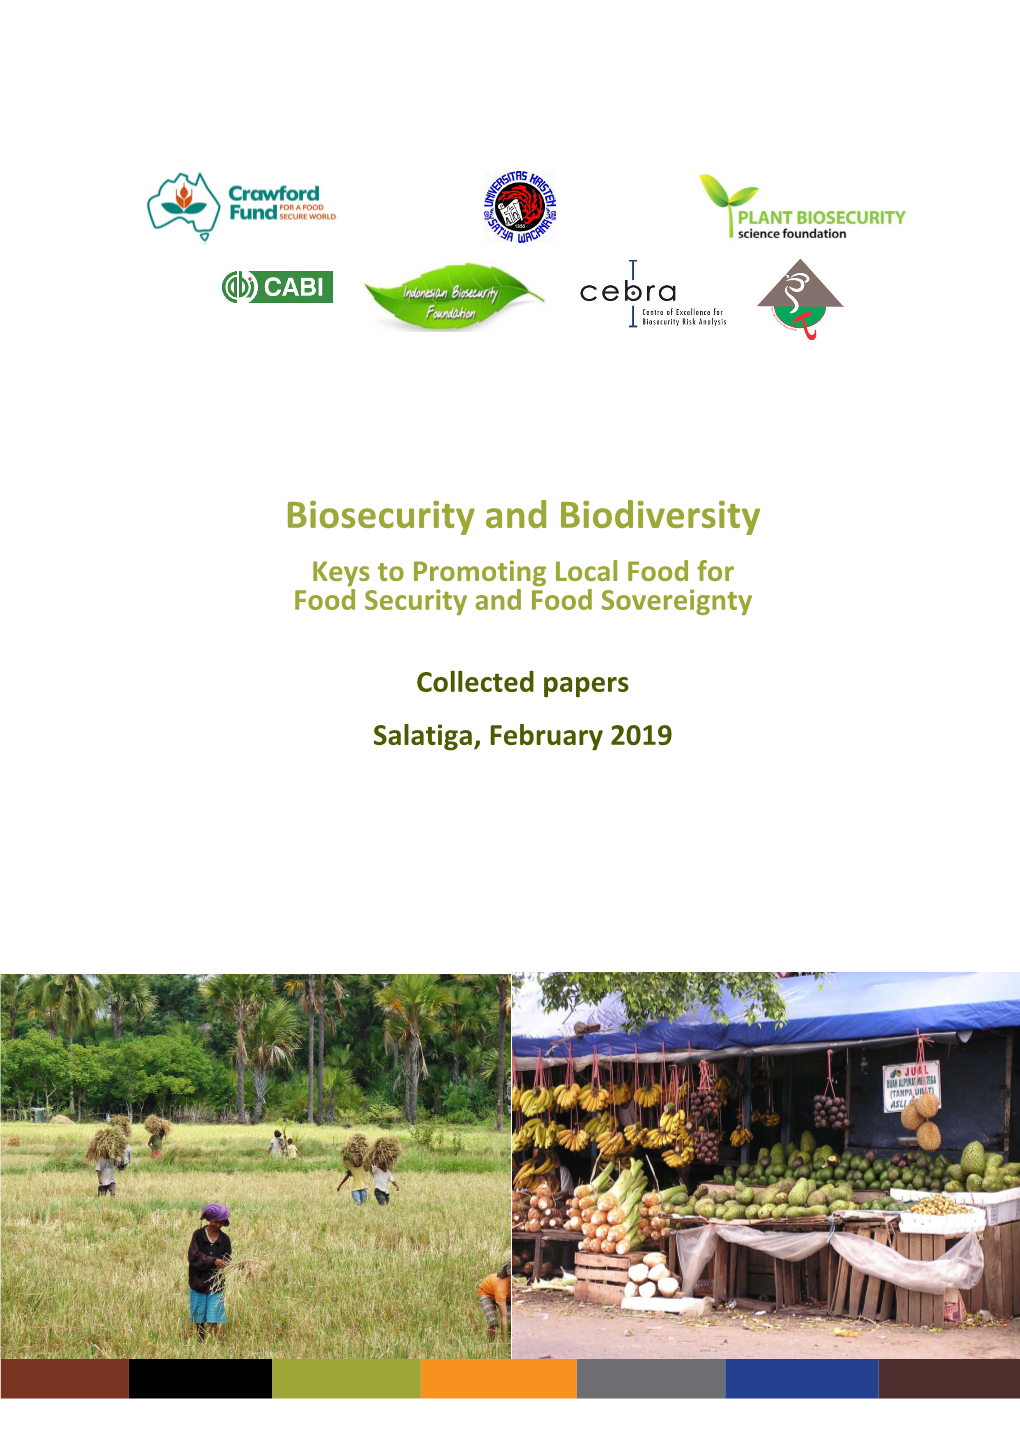 Biosecurity and Biodiversity Keys to Promoting Local Food for Food Security and Food Sovereignty